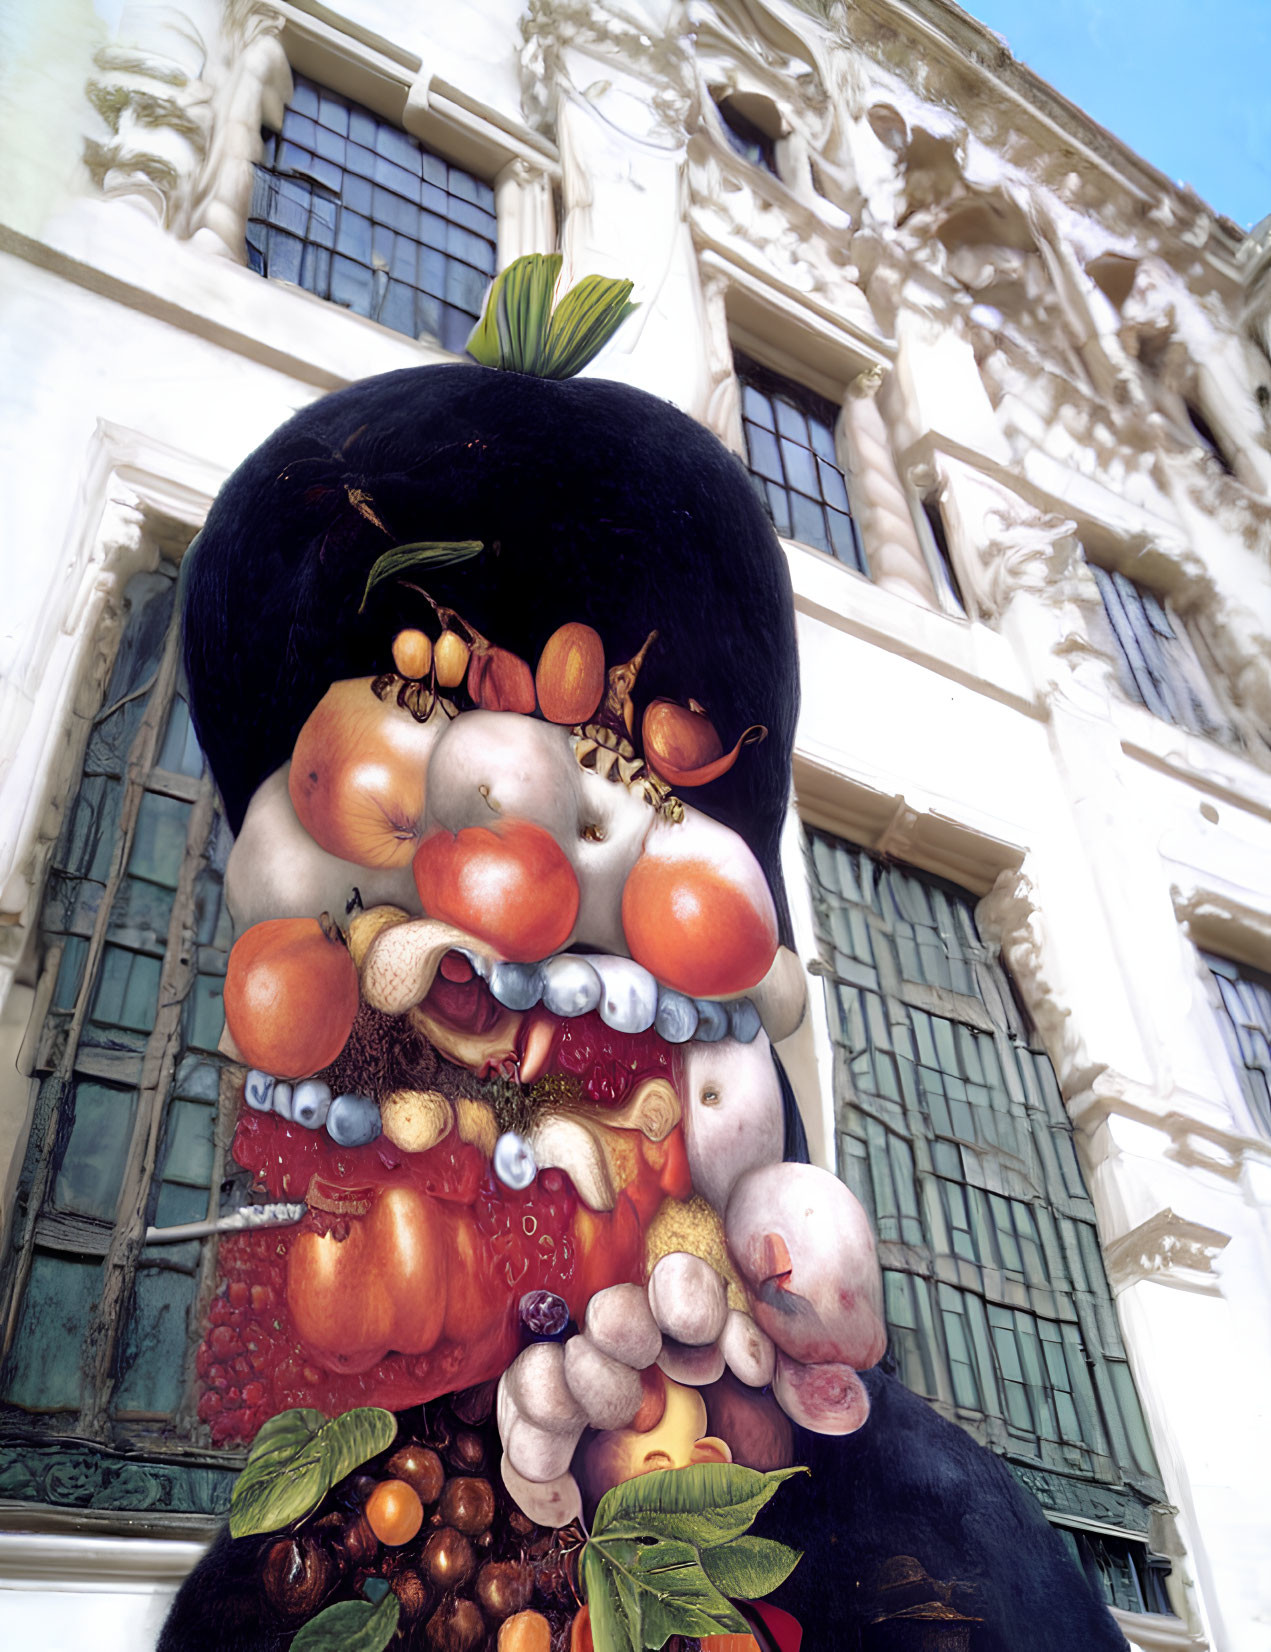 Surreal large fruit head bust in front of classic white building